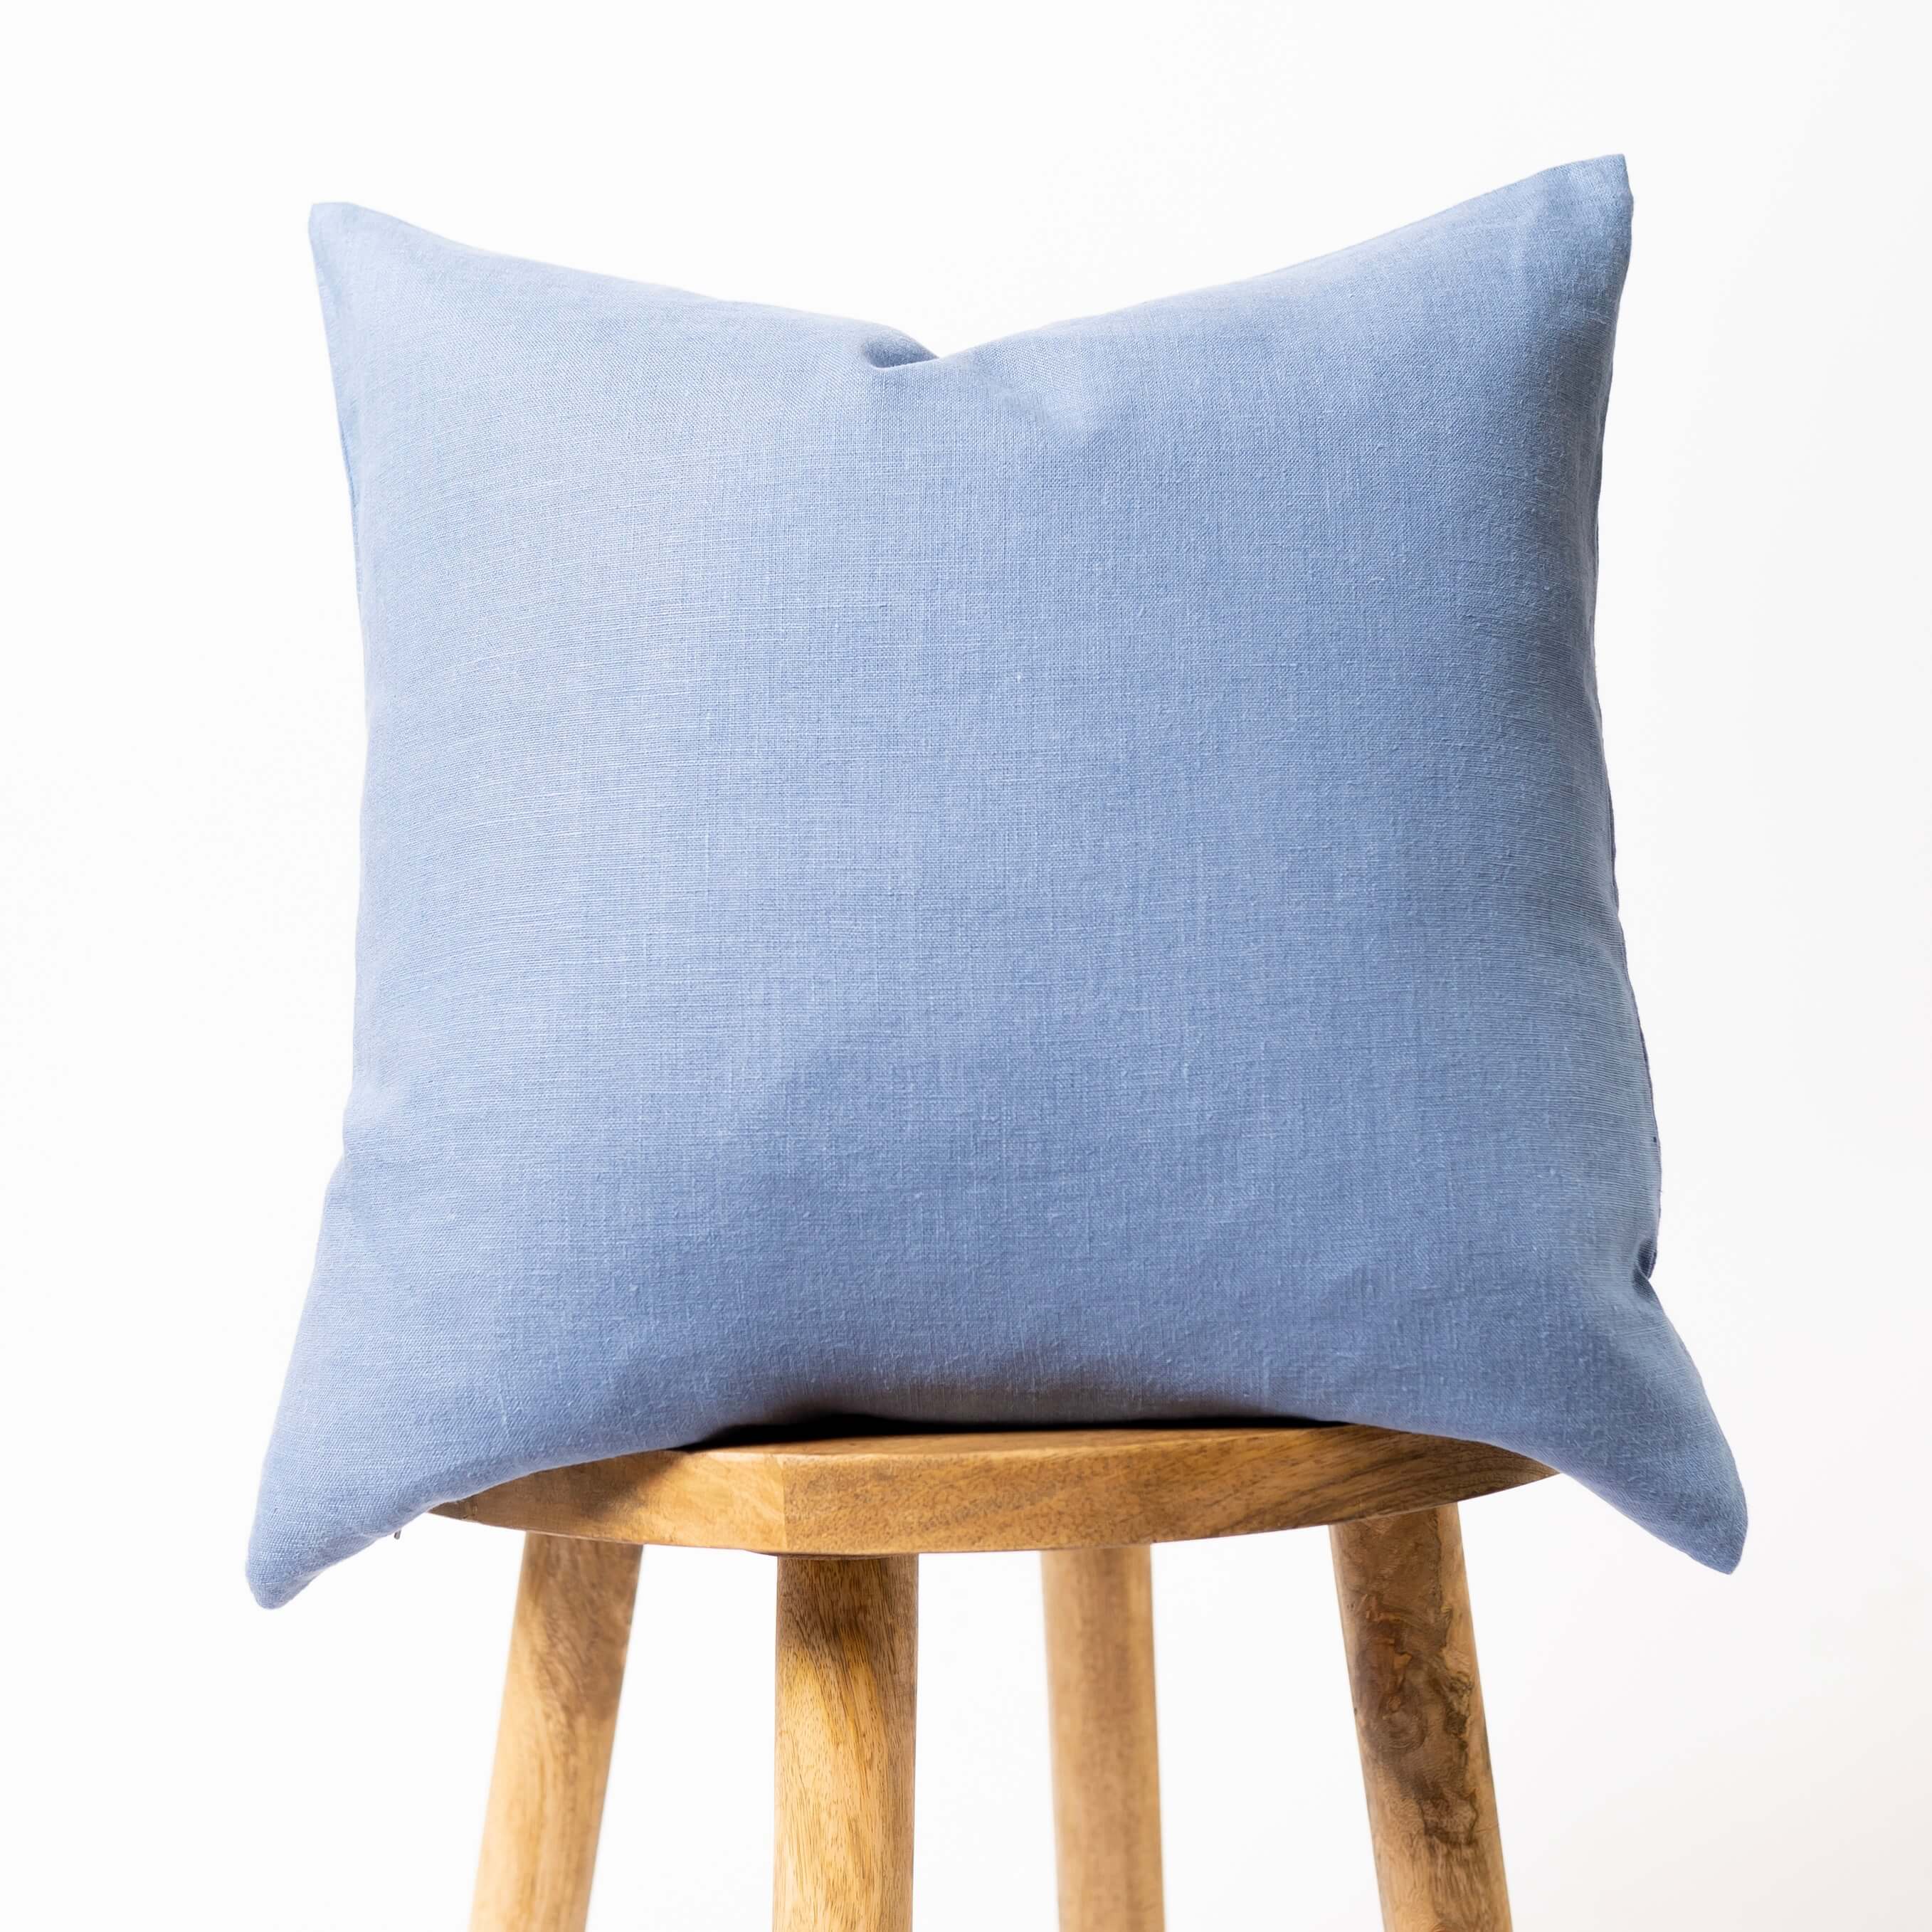 Dusty blue linen cushion cover on wooden stool